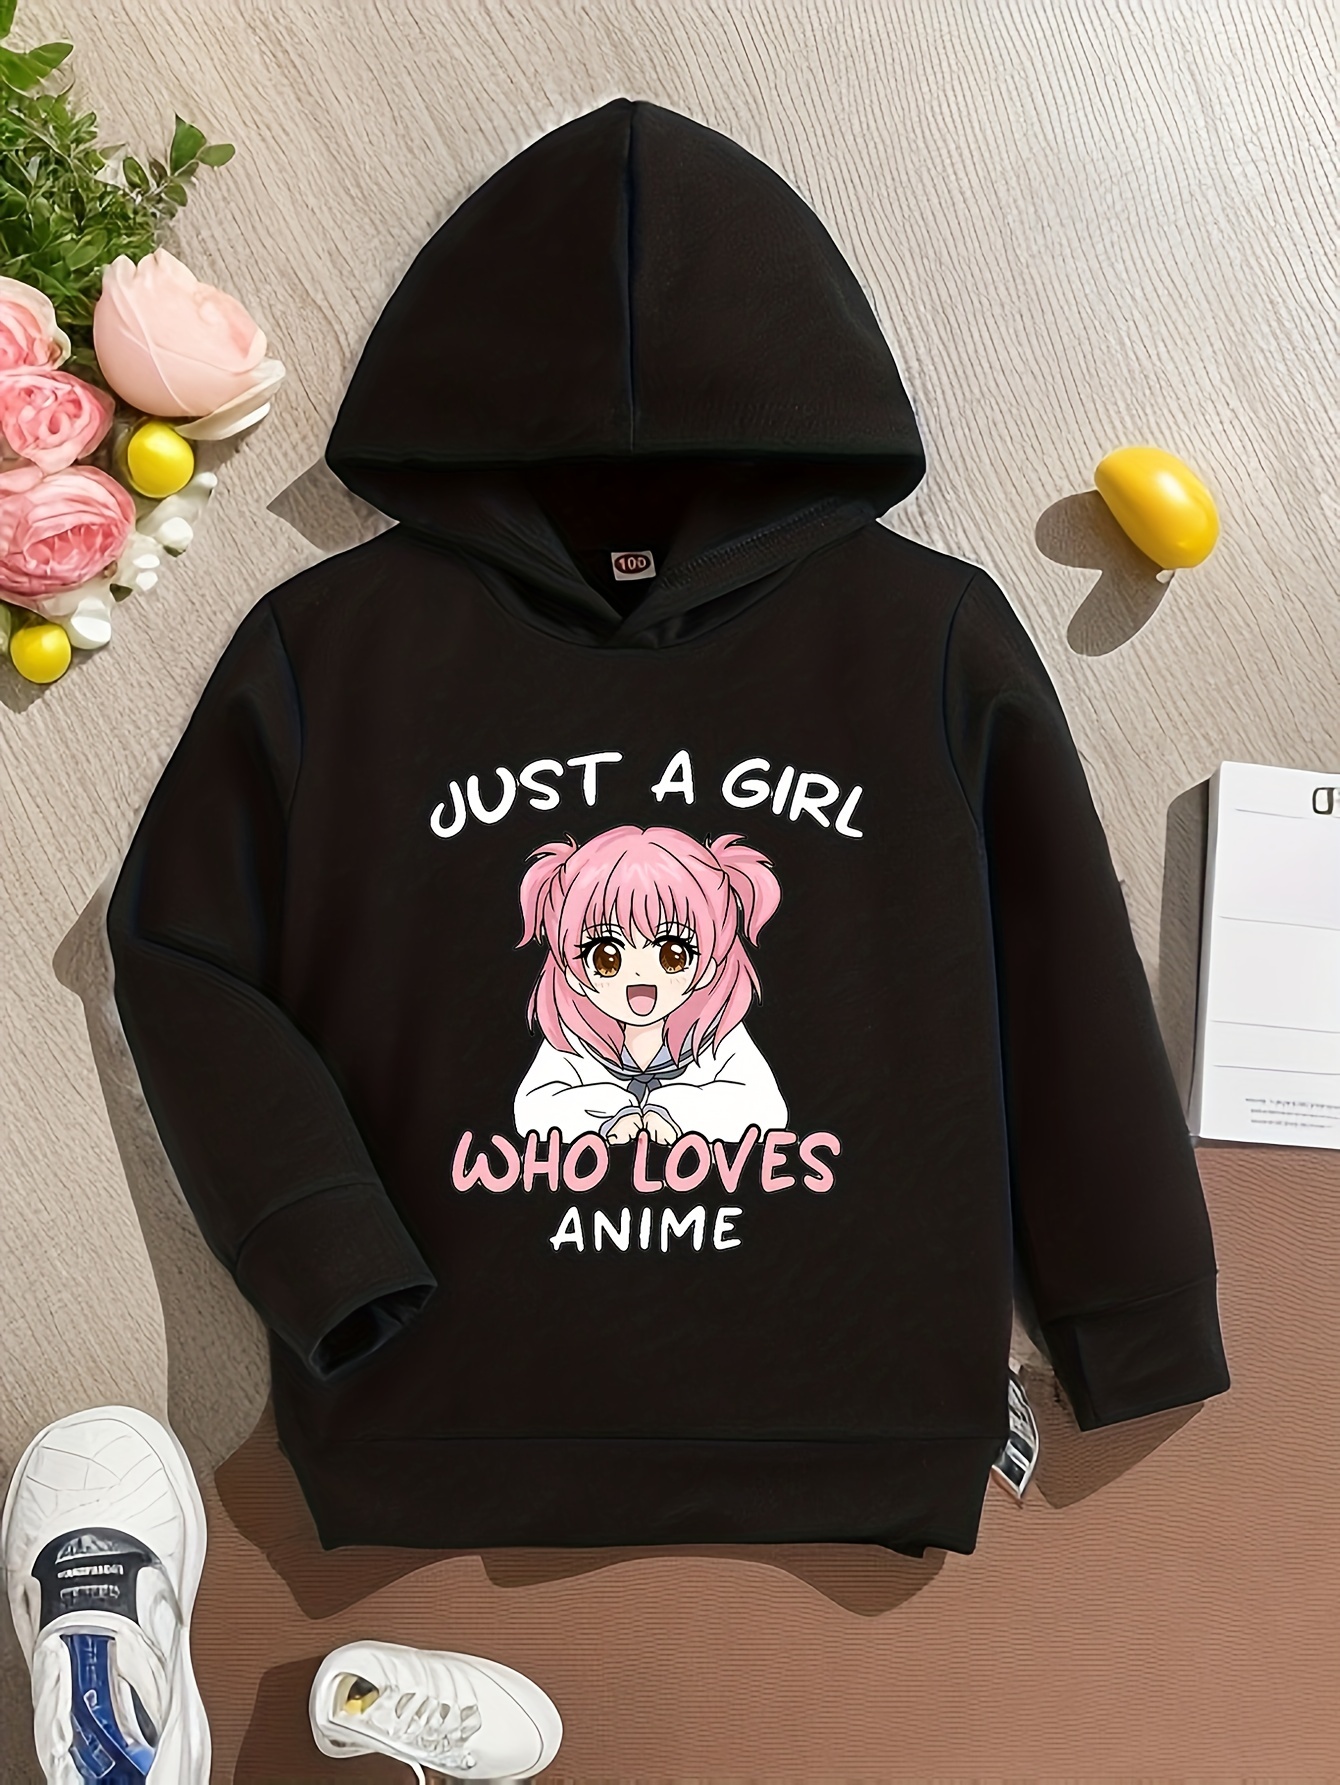 Anime Girl Graphic Print Hoodie for Girls, Girl's Casual Graphic Design Pullover Hooded Sweatshirt with Kangaroo Pocket Streetwear for Winter Fall